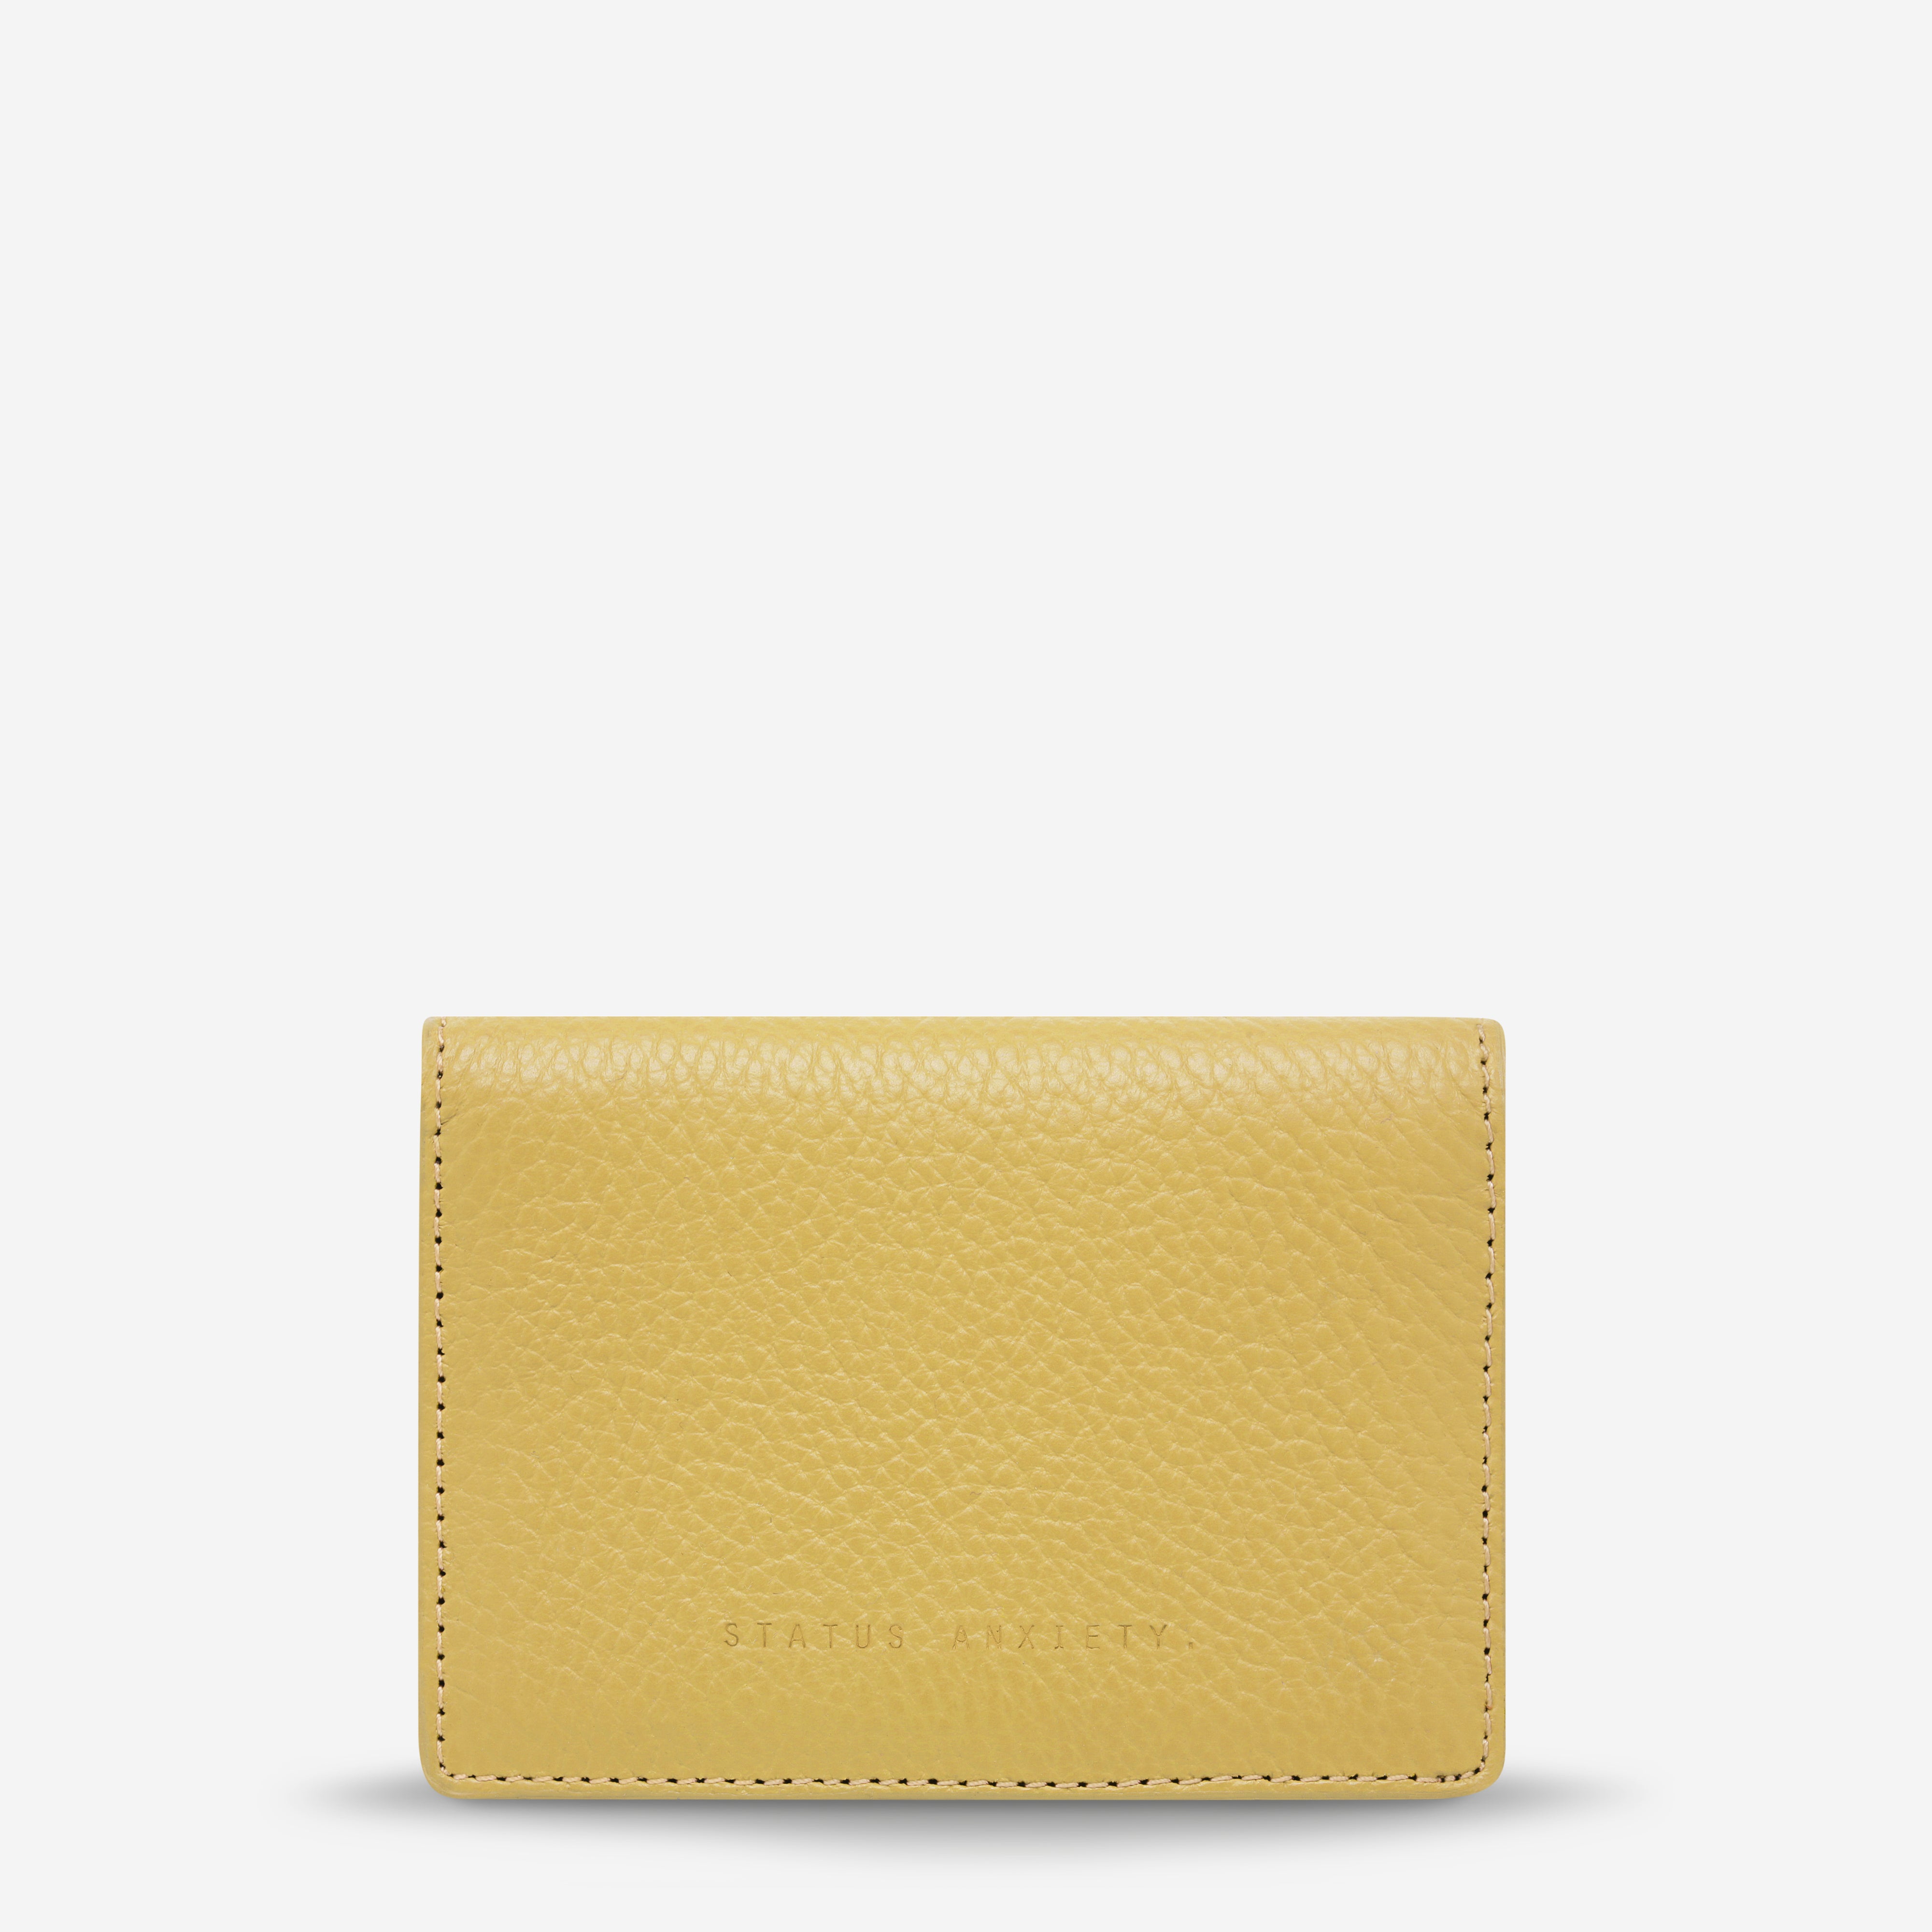 Status Anxiety Easy Does It Women's Leather Wallet Buttermilk